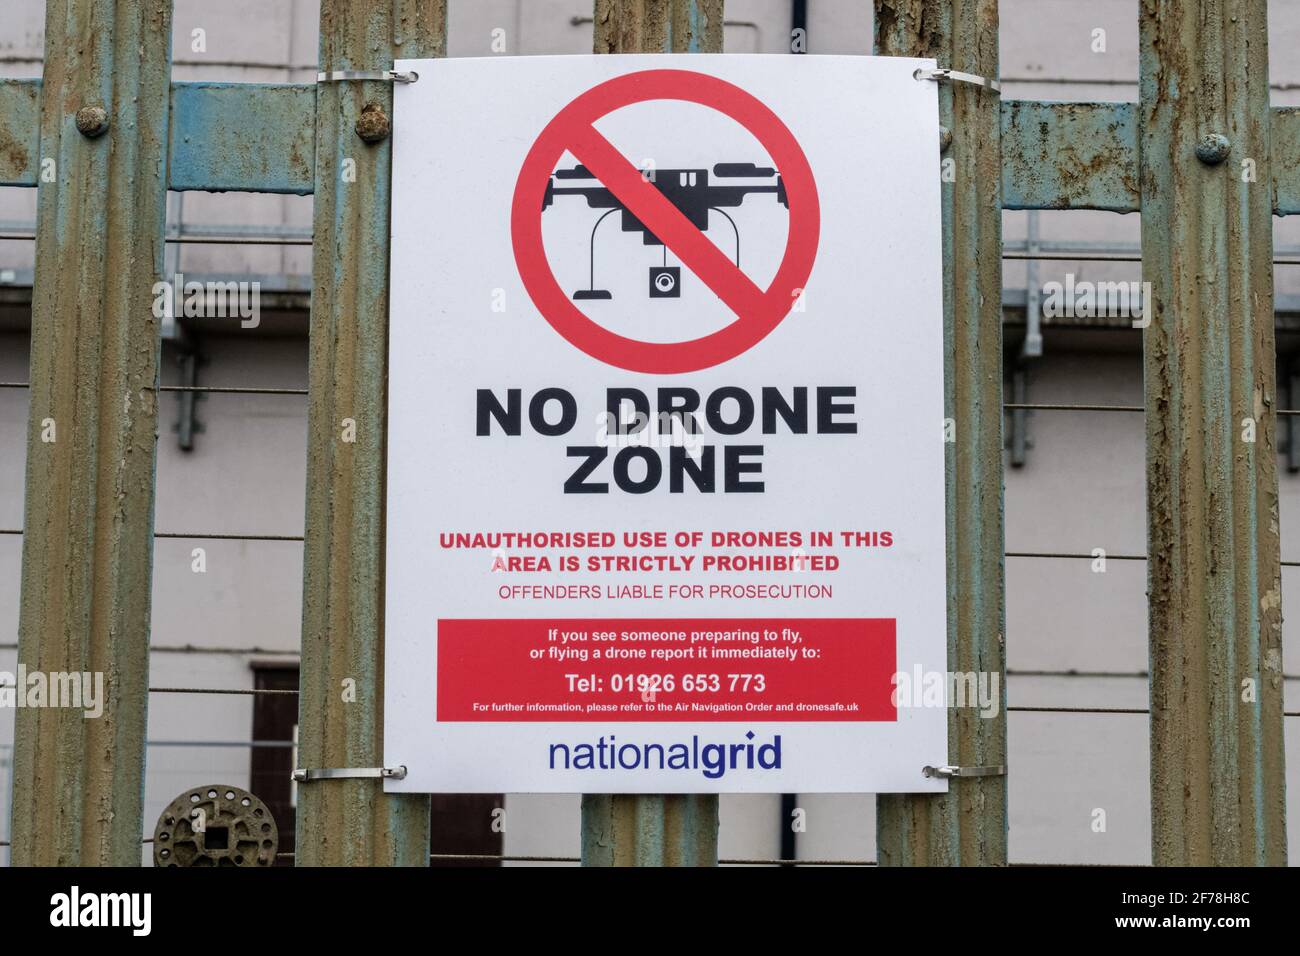 No drone zone sign prohibiting flying drones over National Grid property in London, England United Kingdom UK Stock Photo